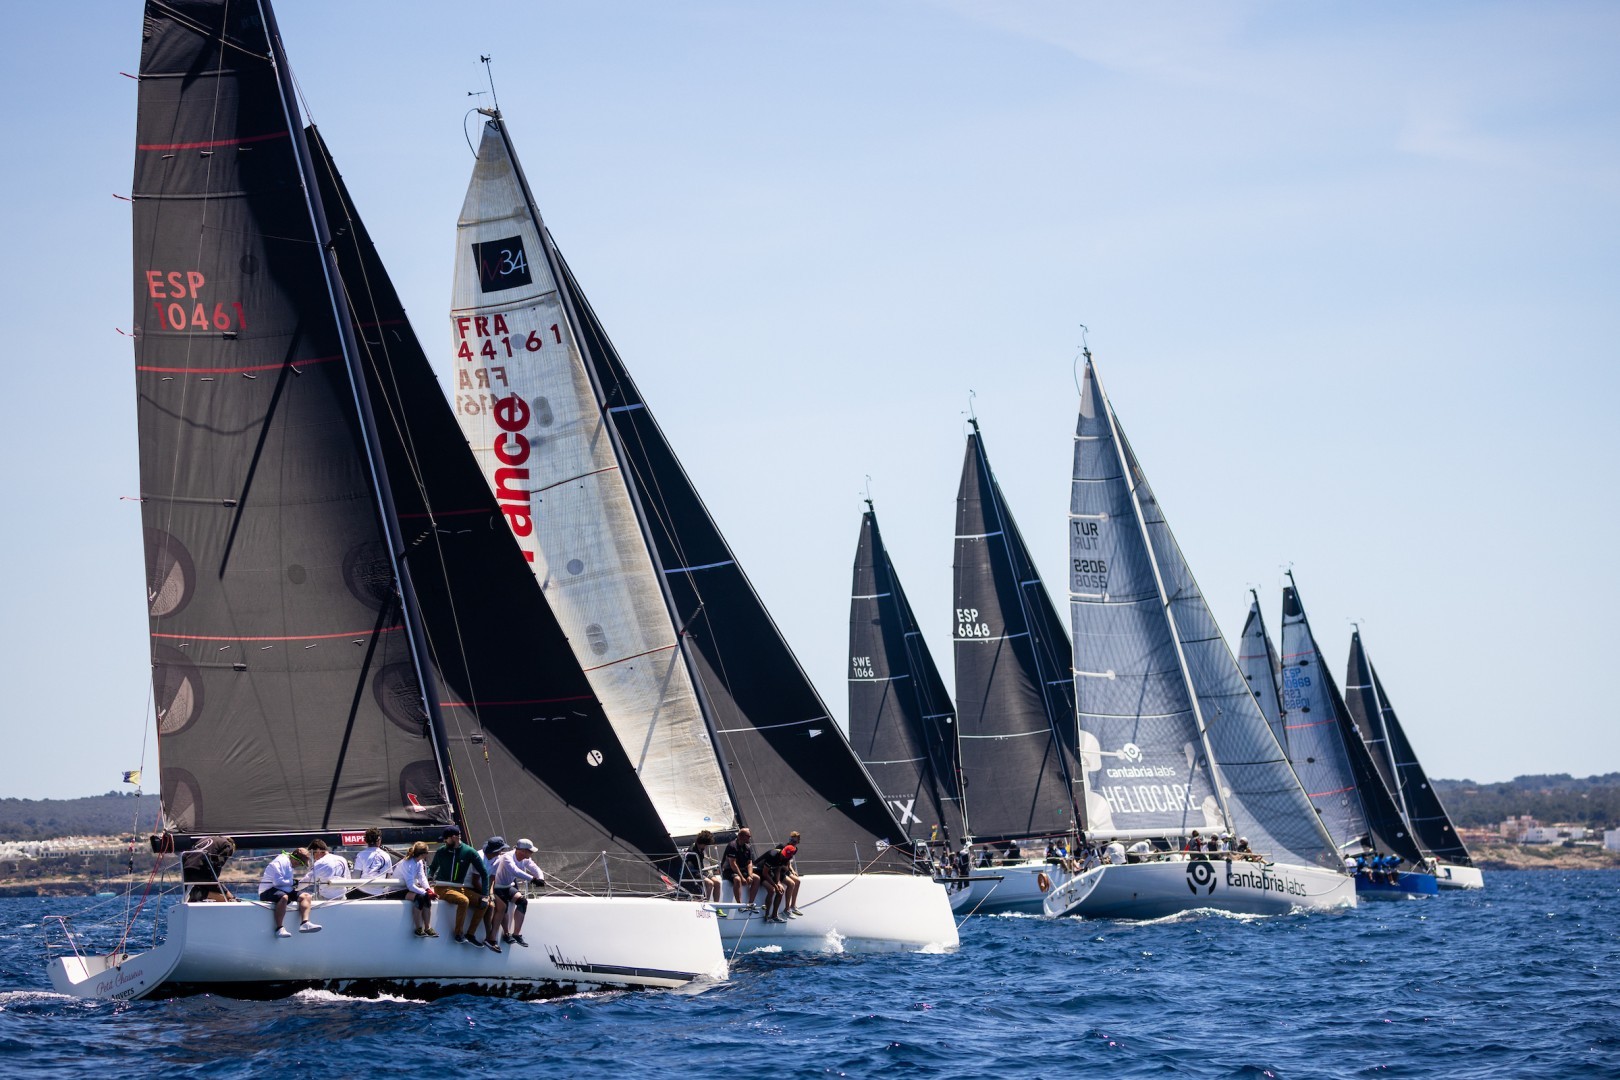 A brilliant Day Two of the 19th edition of PalmaVela with nearly one hundred boats on the water